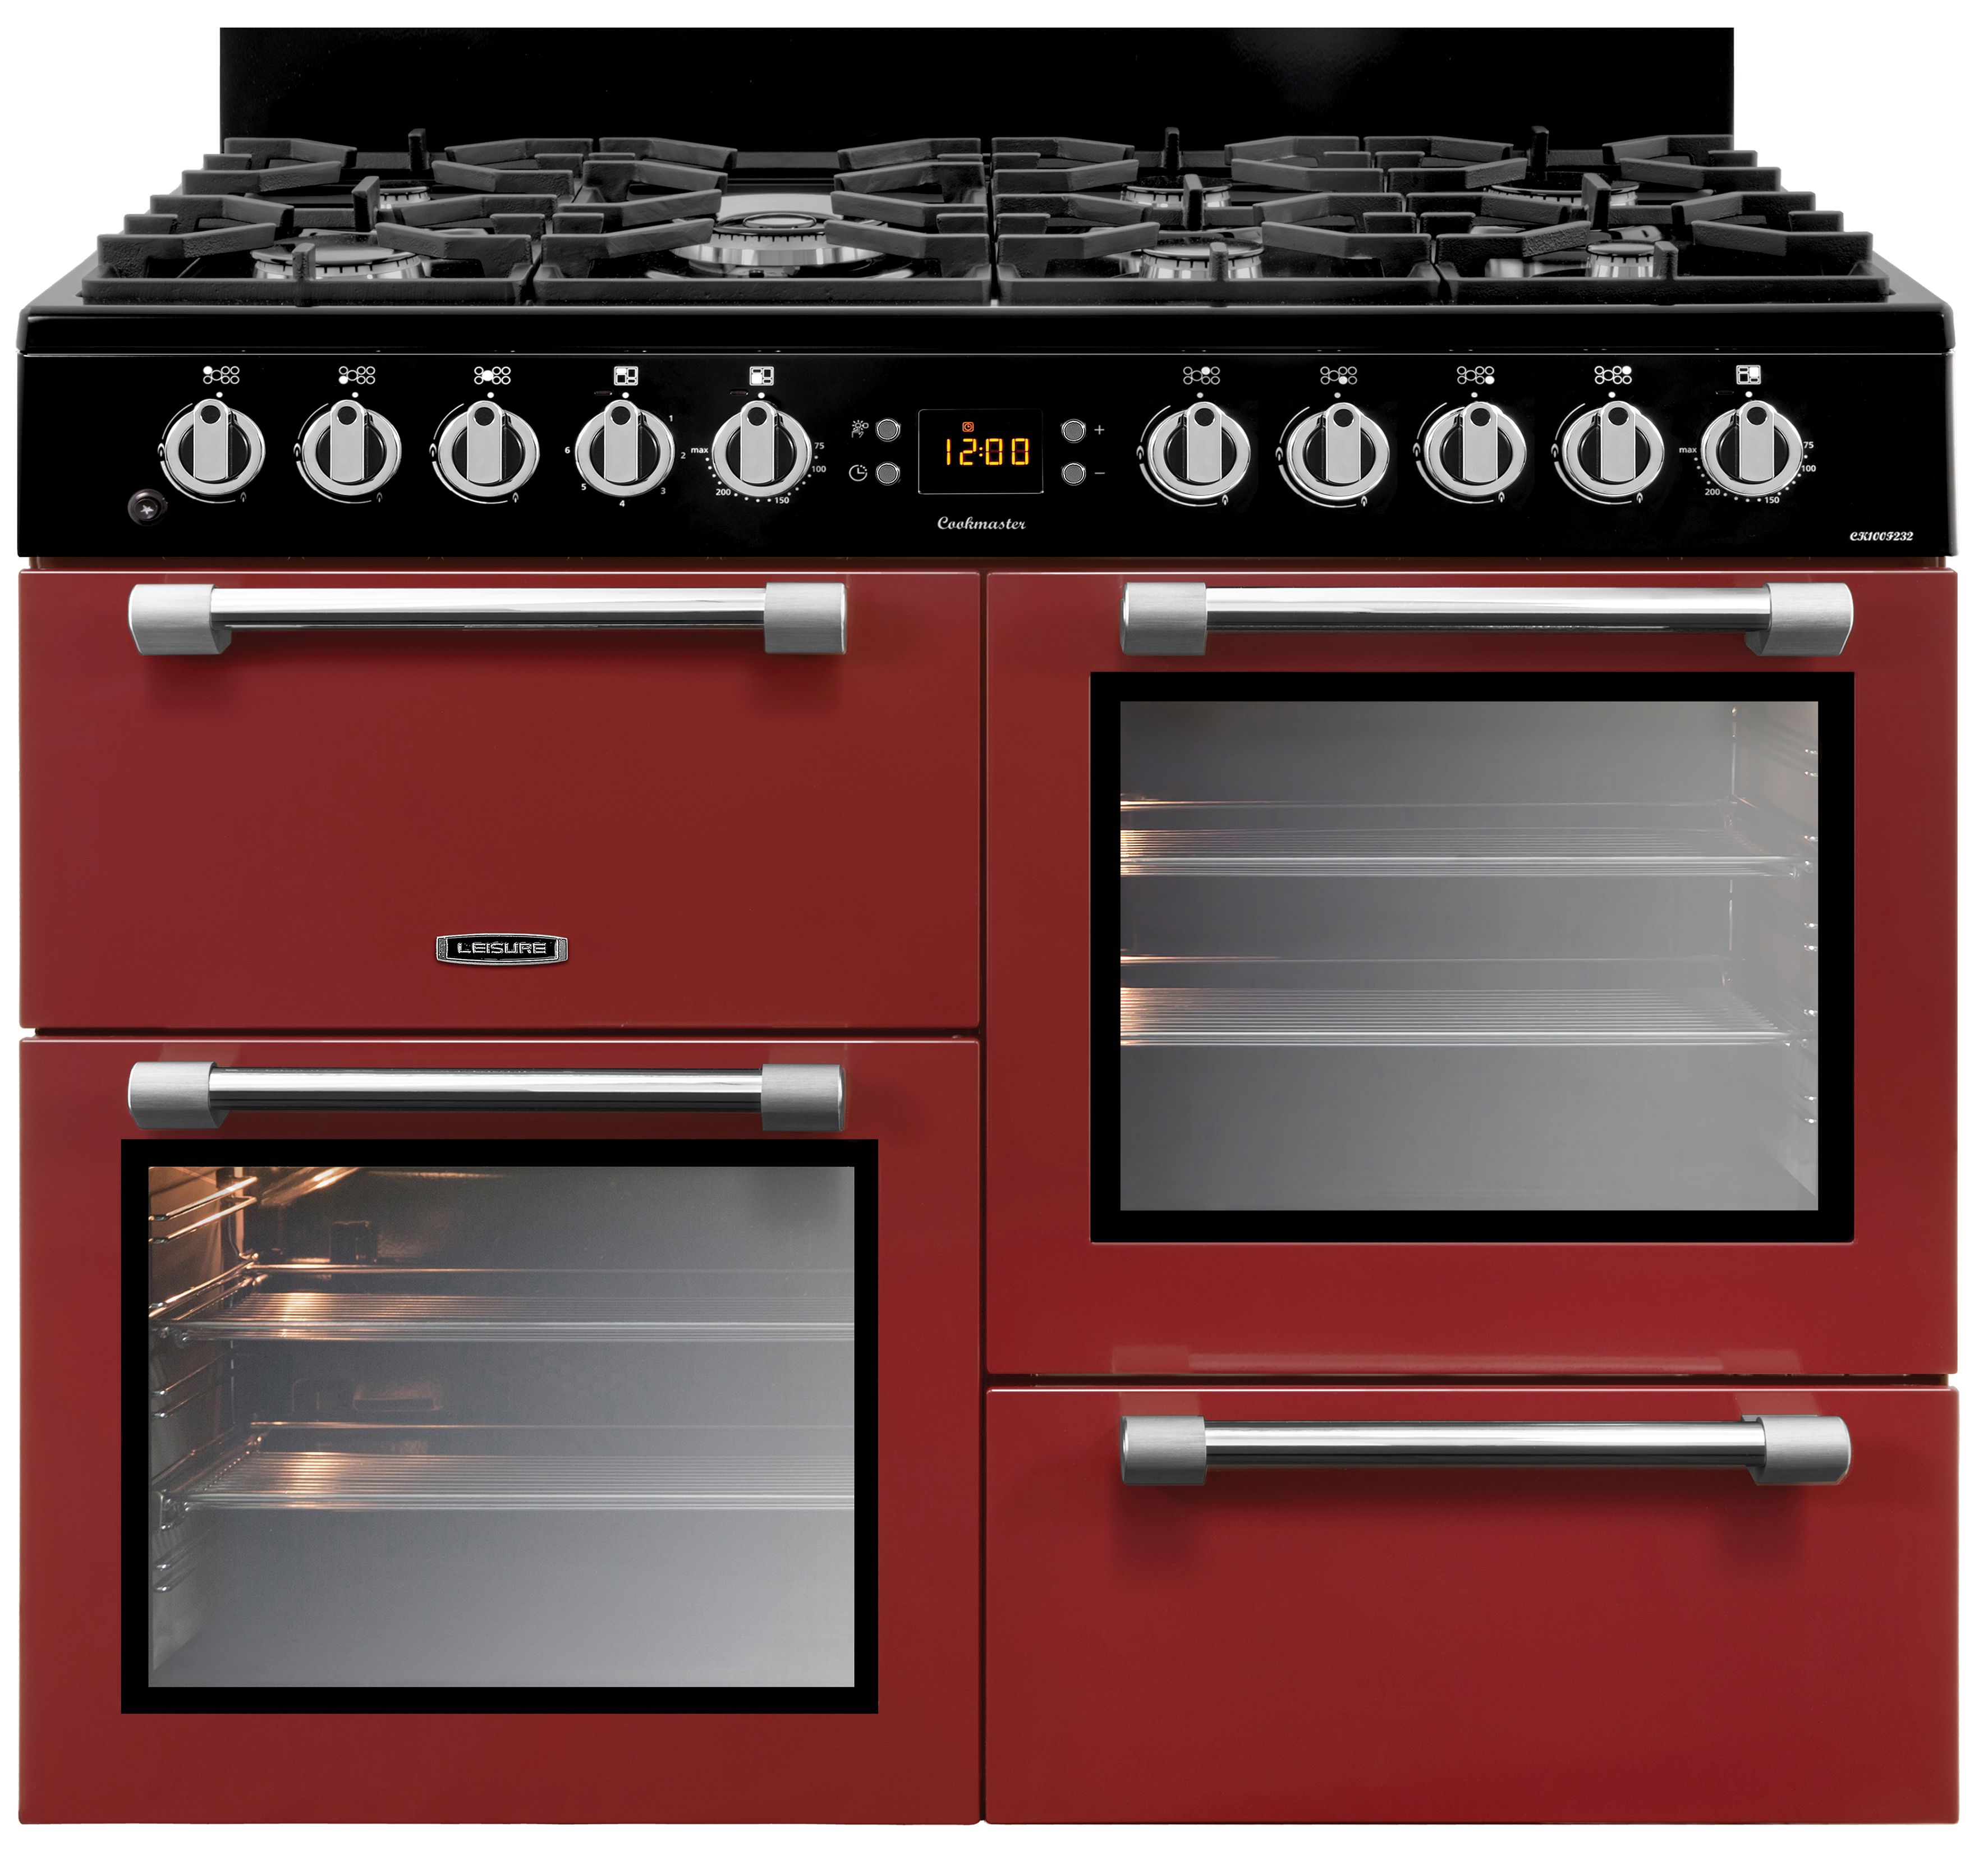 Leisure Cookmaster 100cm Dual Fuel Range Cooker - Red